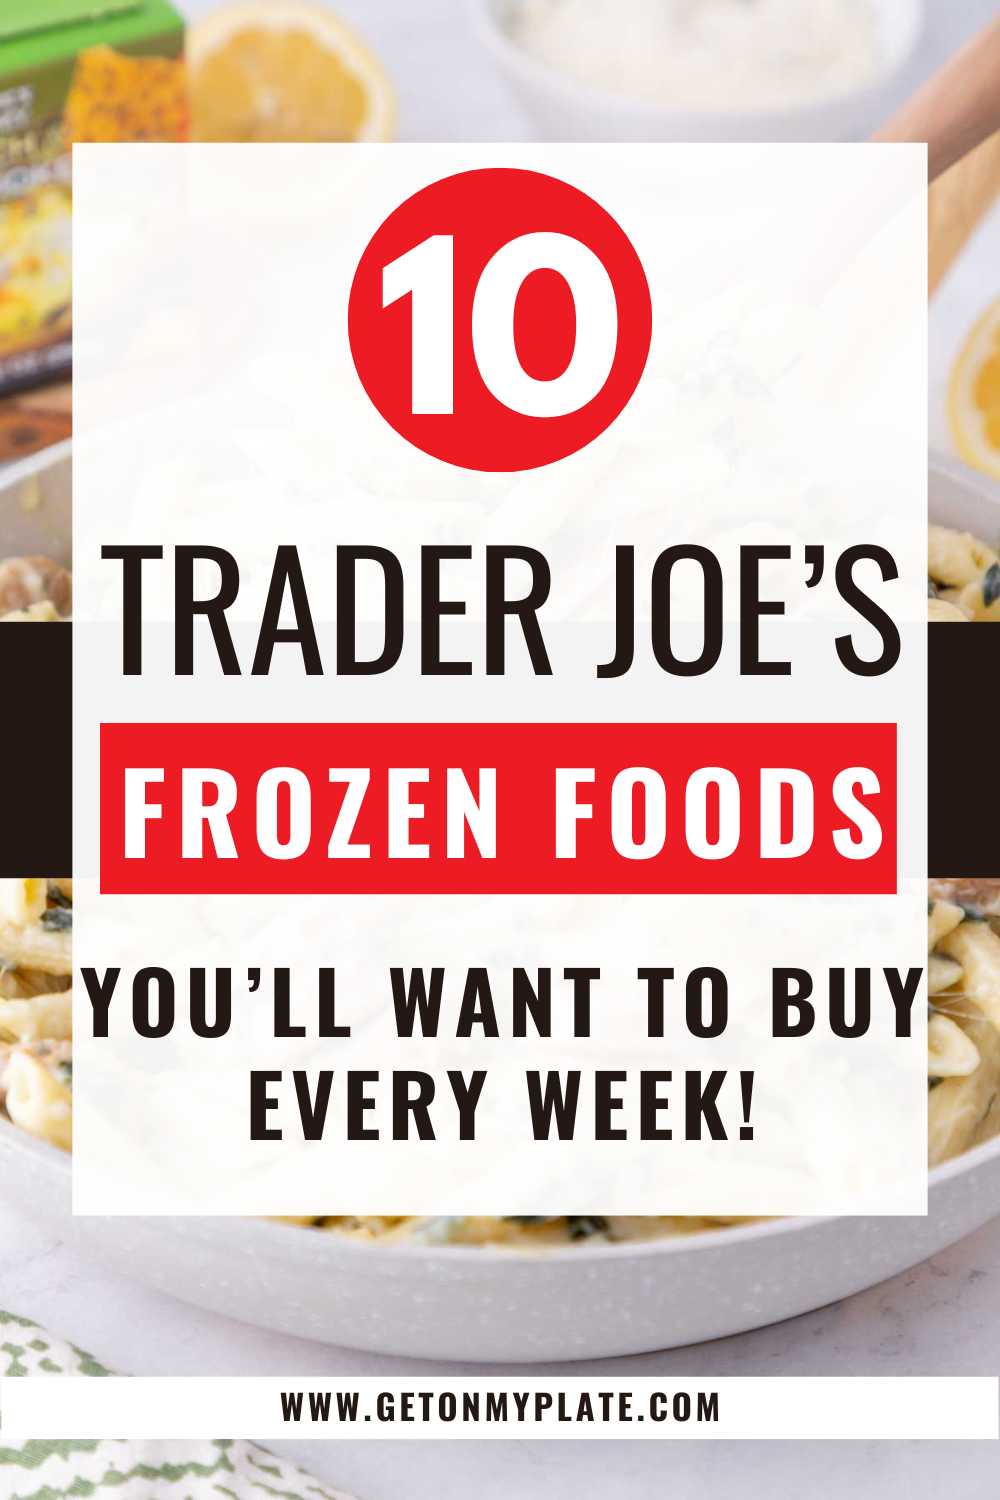 Featured images for Trader Joe's frozen food.